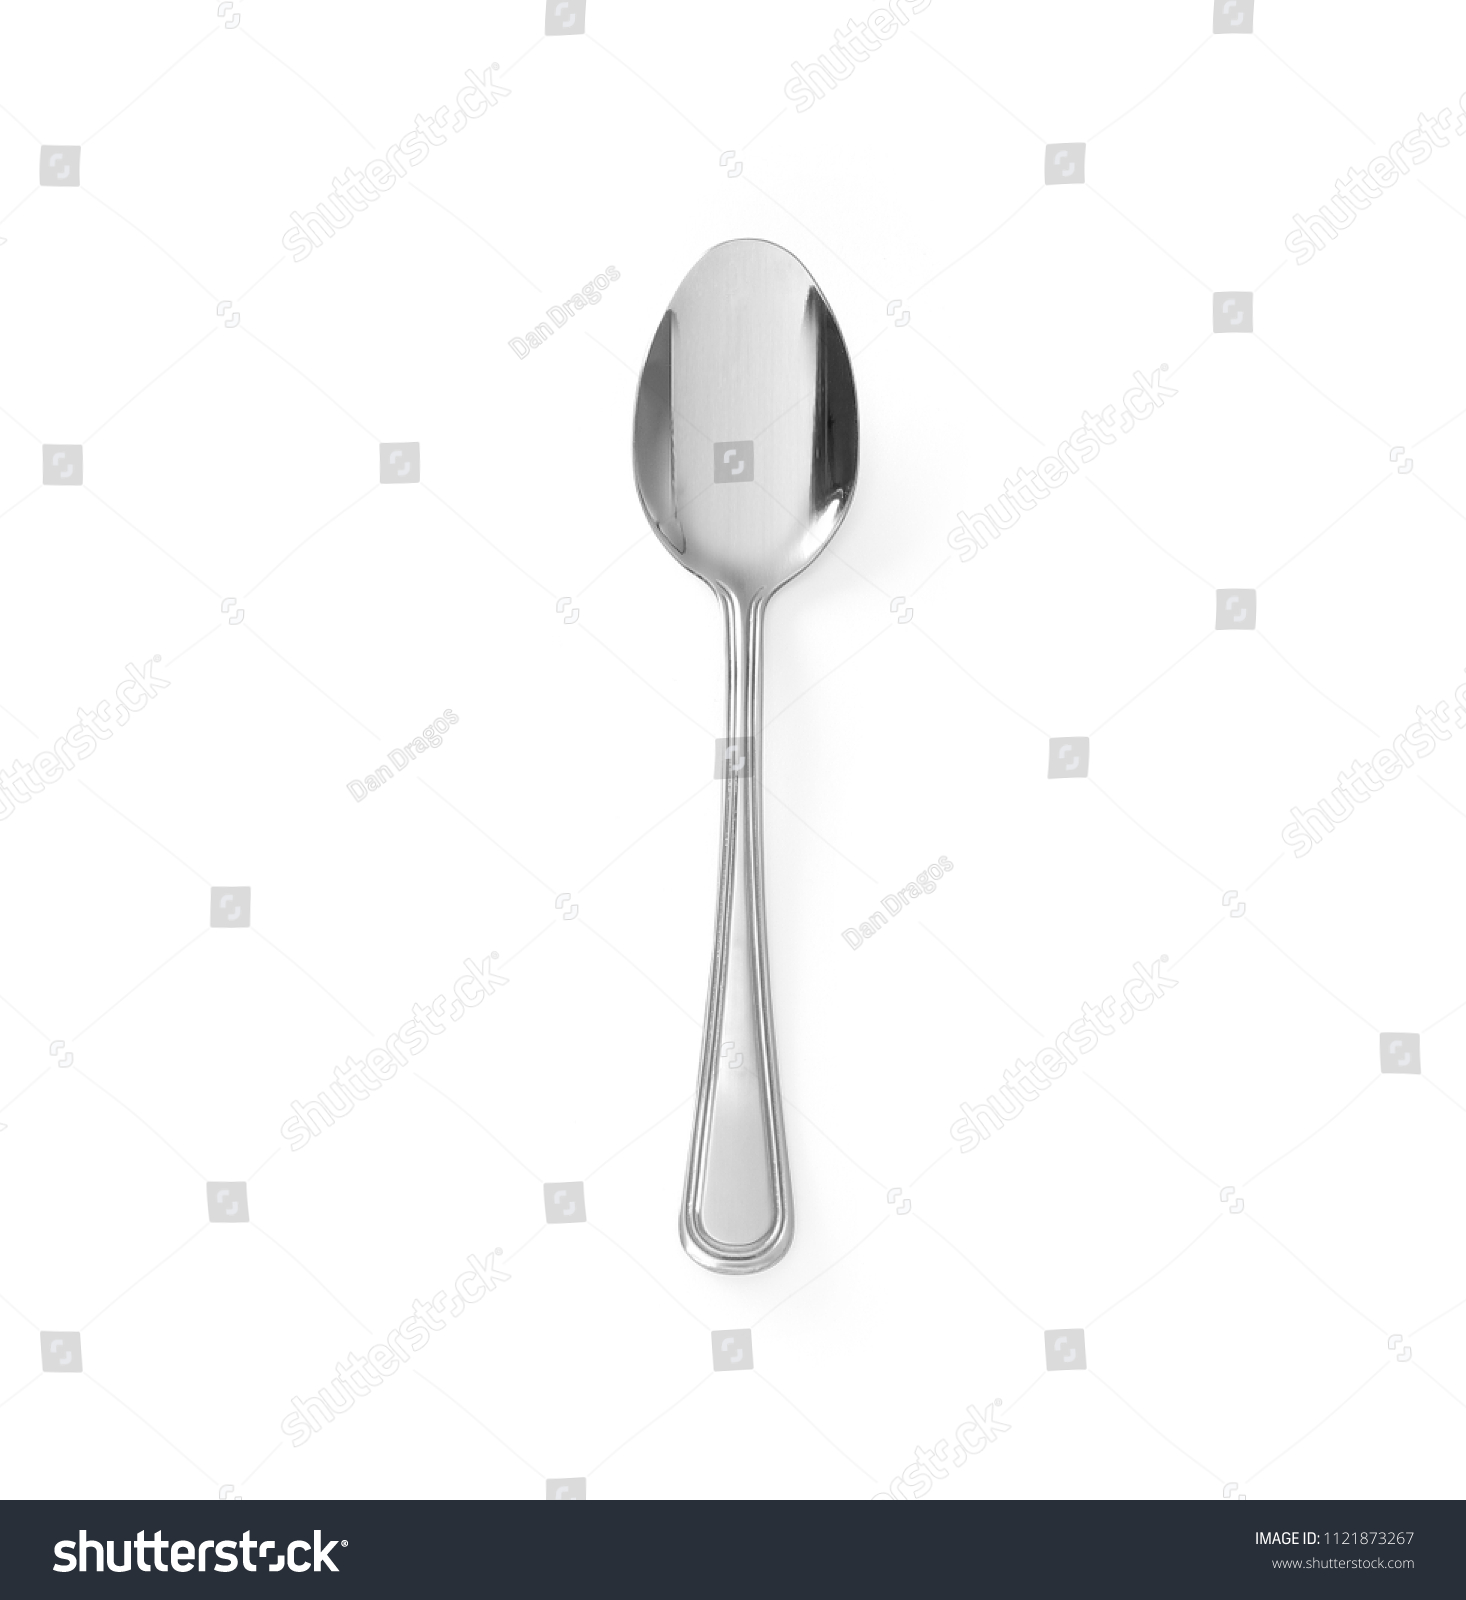 Coffee Spoon stainless steel isolated on white background #1121873267